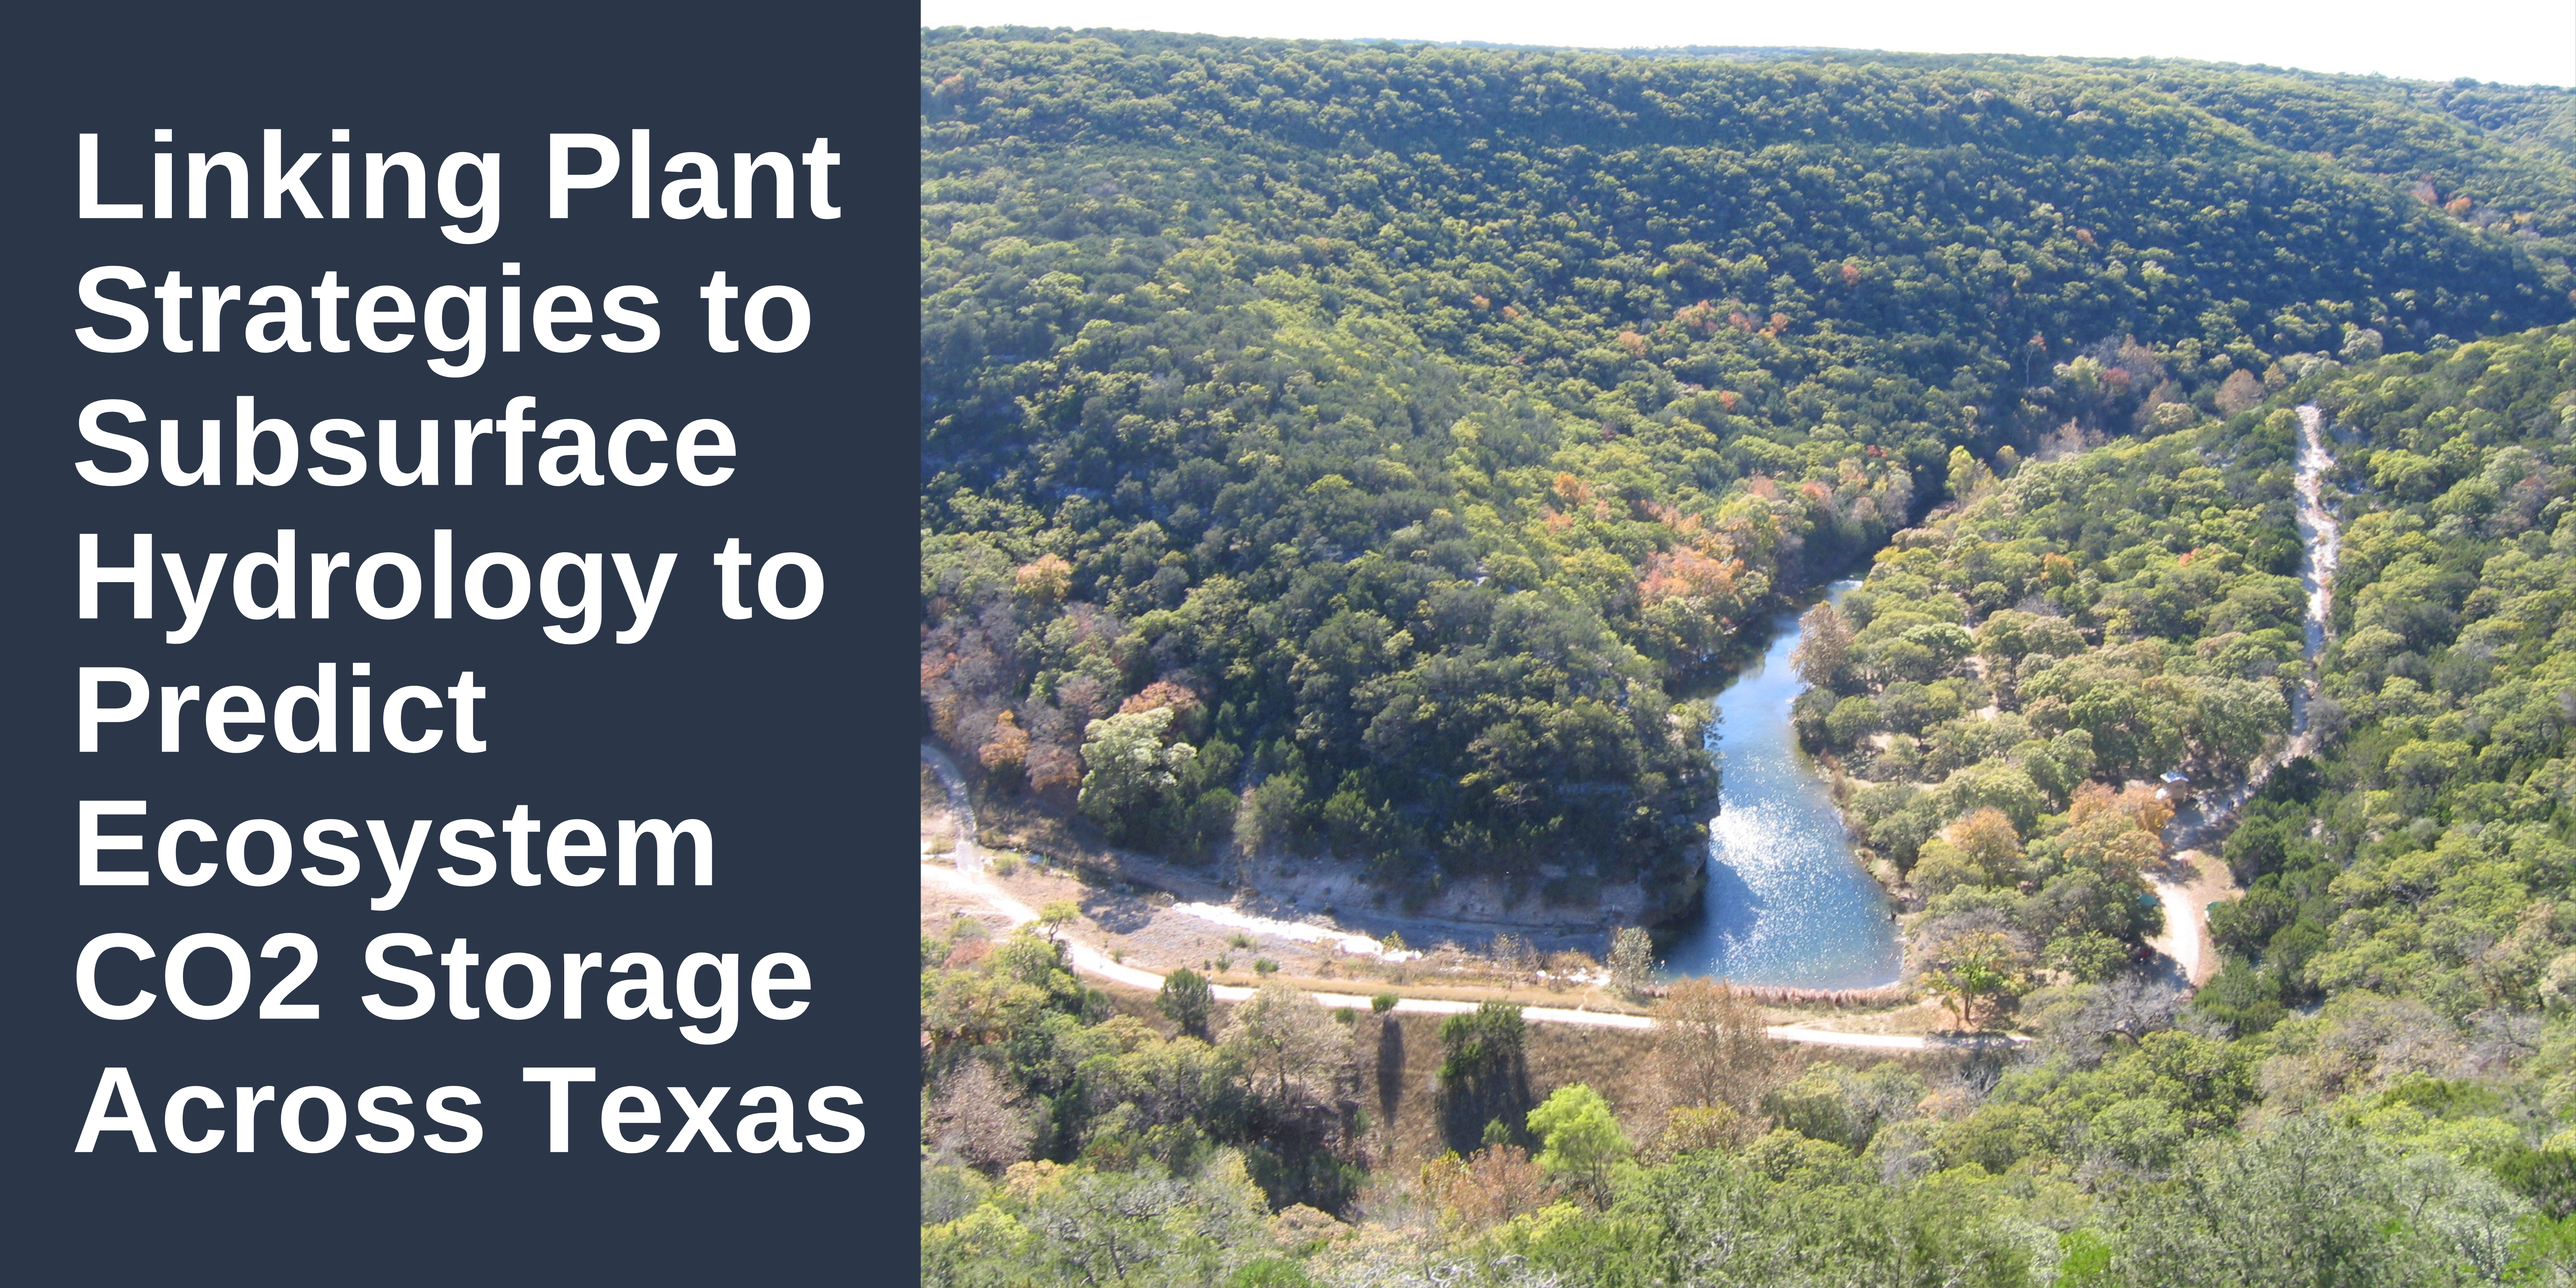 Image of Edwards Plateau with title - Linking Plant Strategies to Subsurface Hydrology to Predict Ecosystem CO2 Storage Across Texas